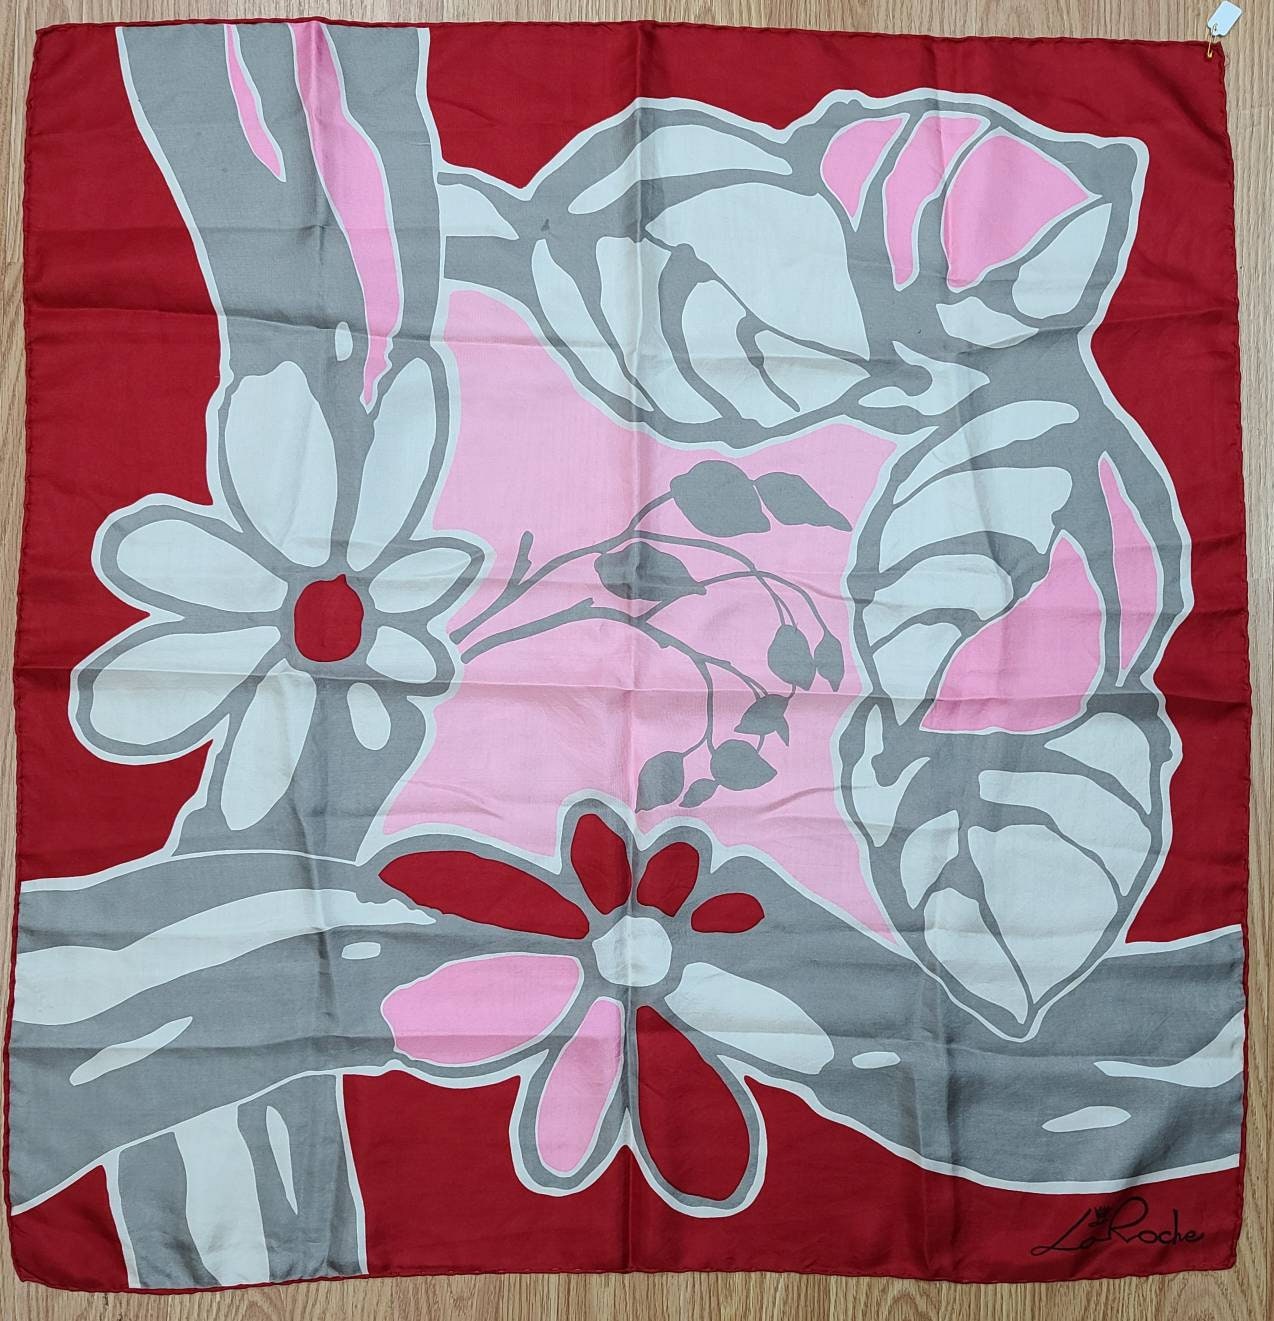 Vintage Silk Scarf 1960s de la Roche Designer Scarf Red White Pink Abstract Floral Pattern Hand Rolled Edges Mod 30 in. sq.